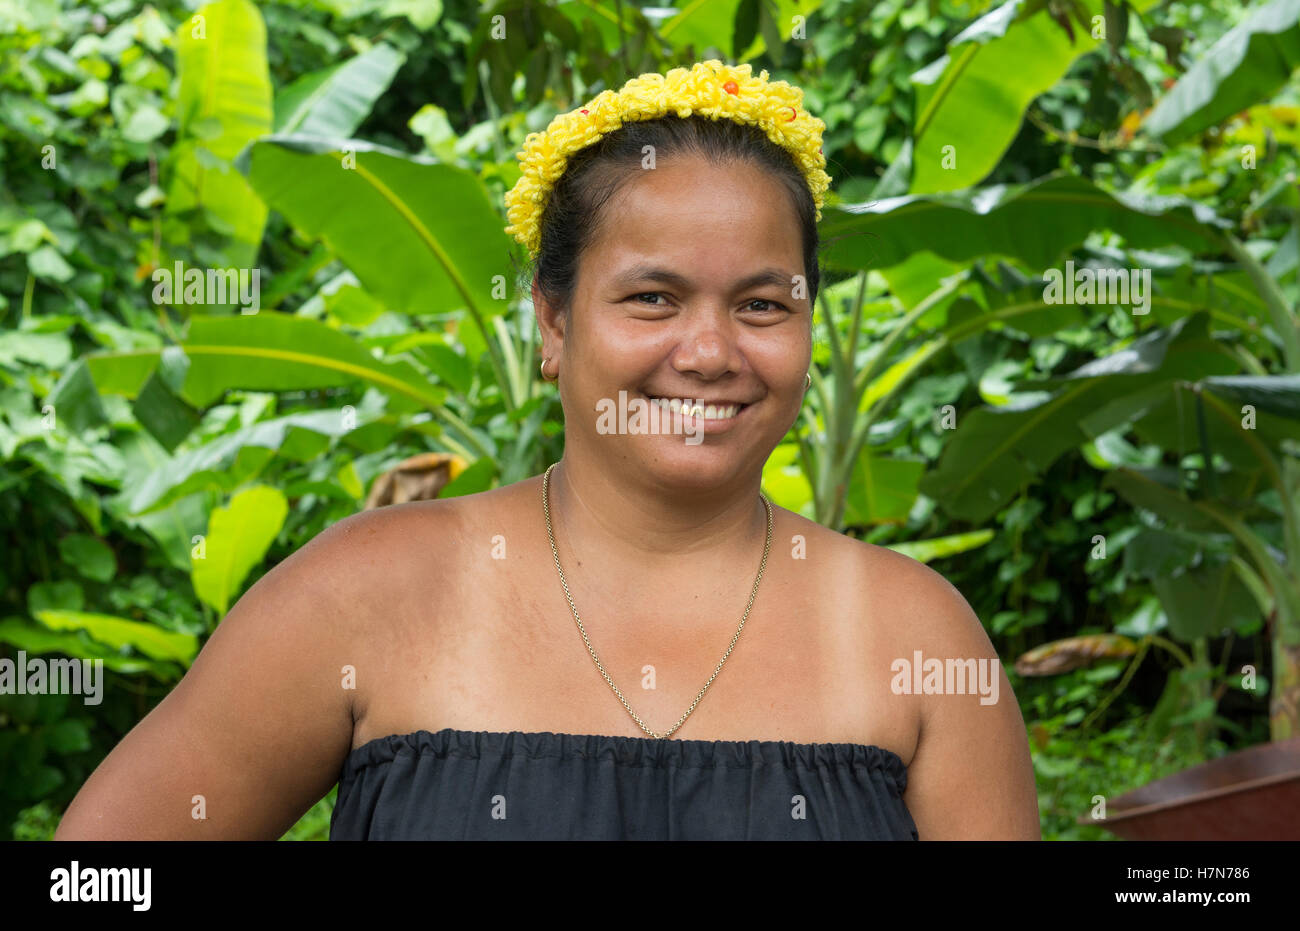 Pohnpei Micronesia beautiful local woman portrait with traditional dress model released MR, MR-5 Stock Photo